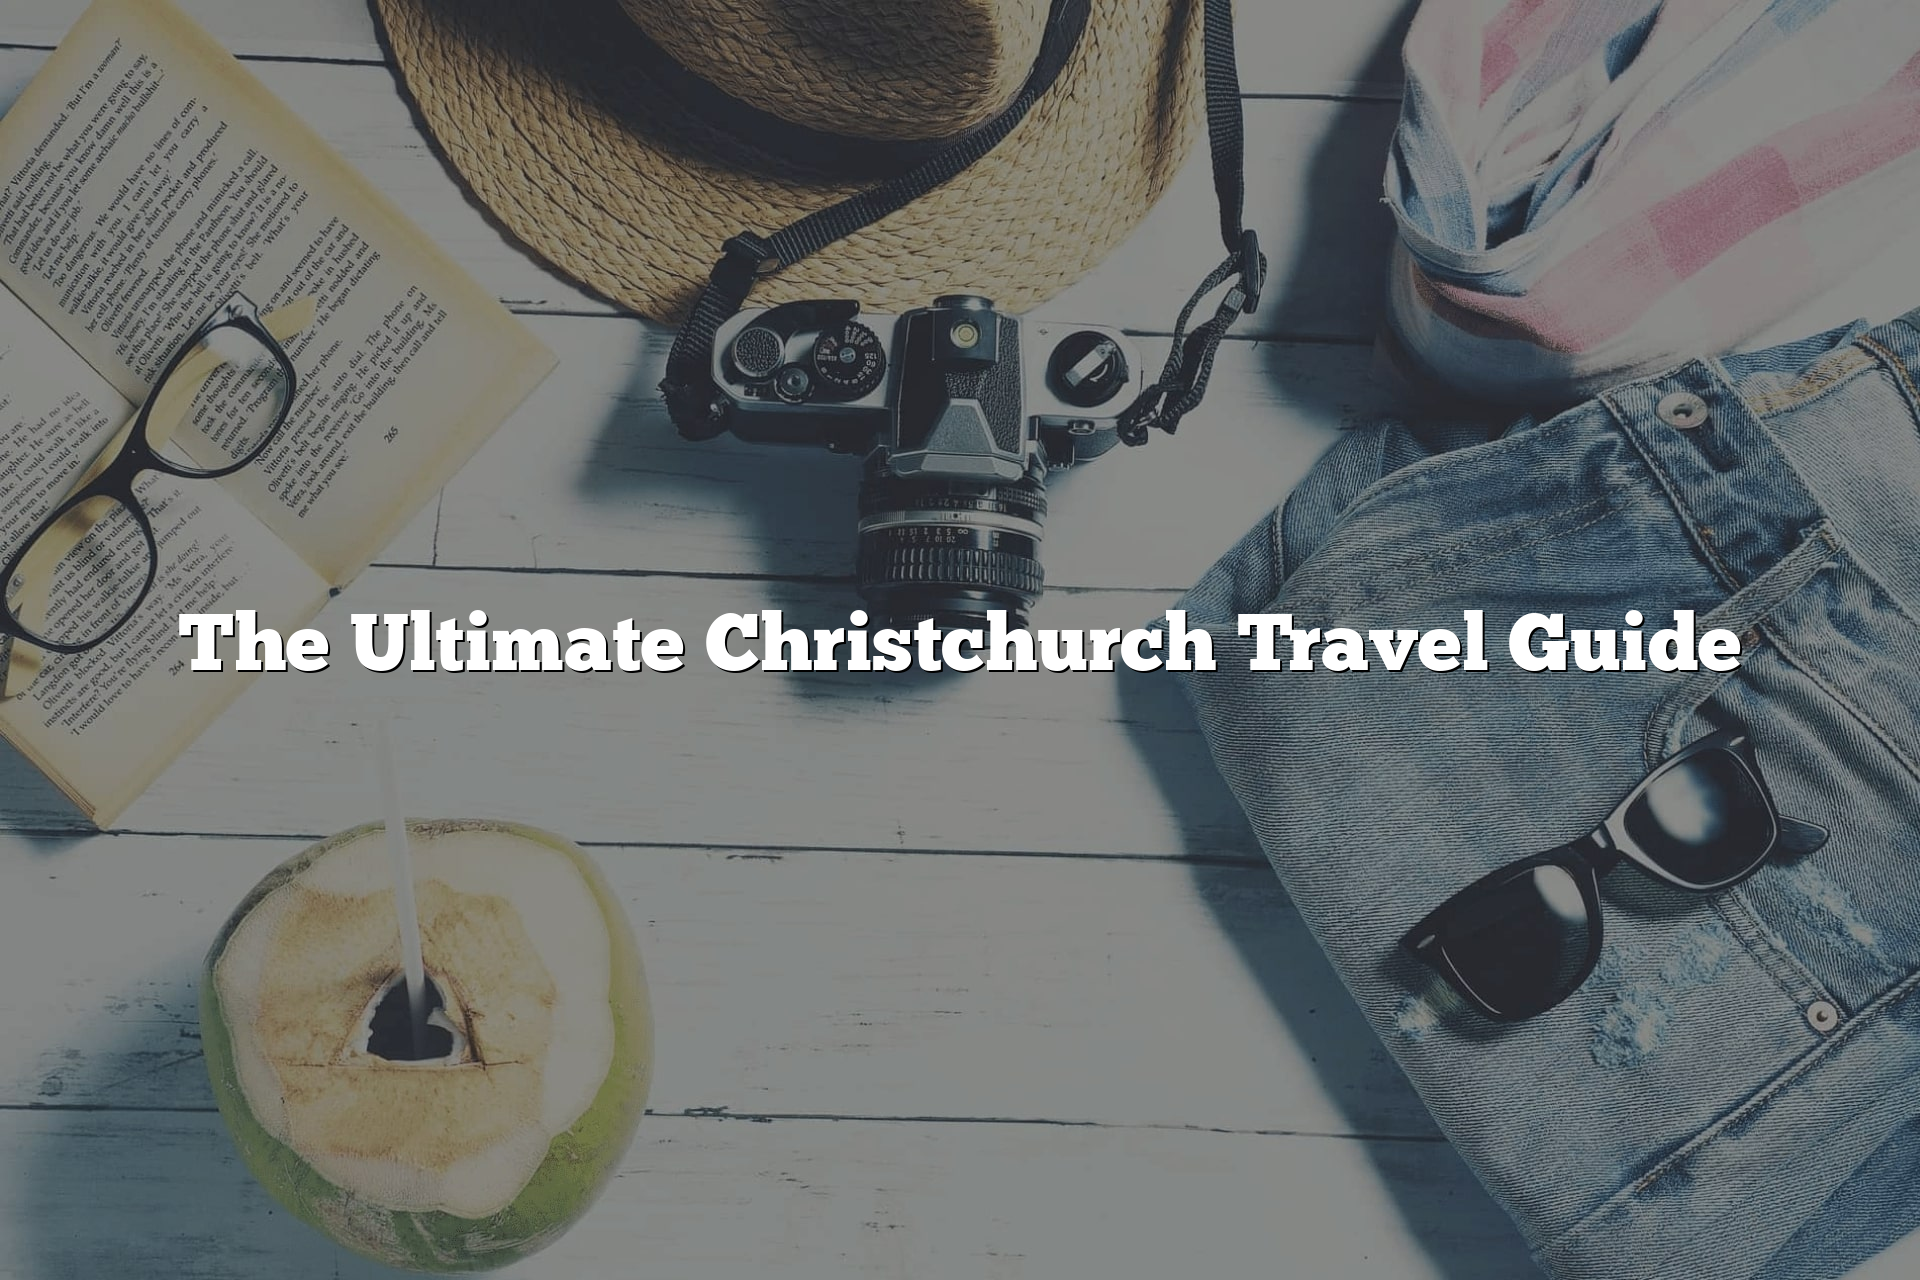 The Ultimate Christchurch Travel Guide